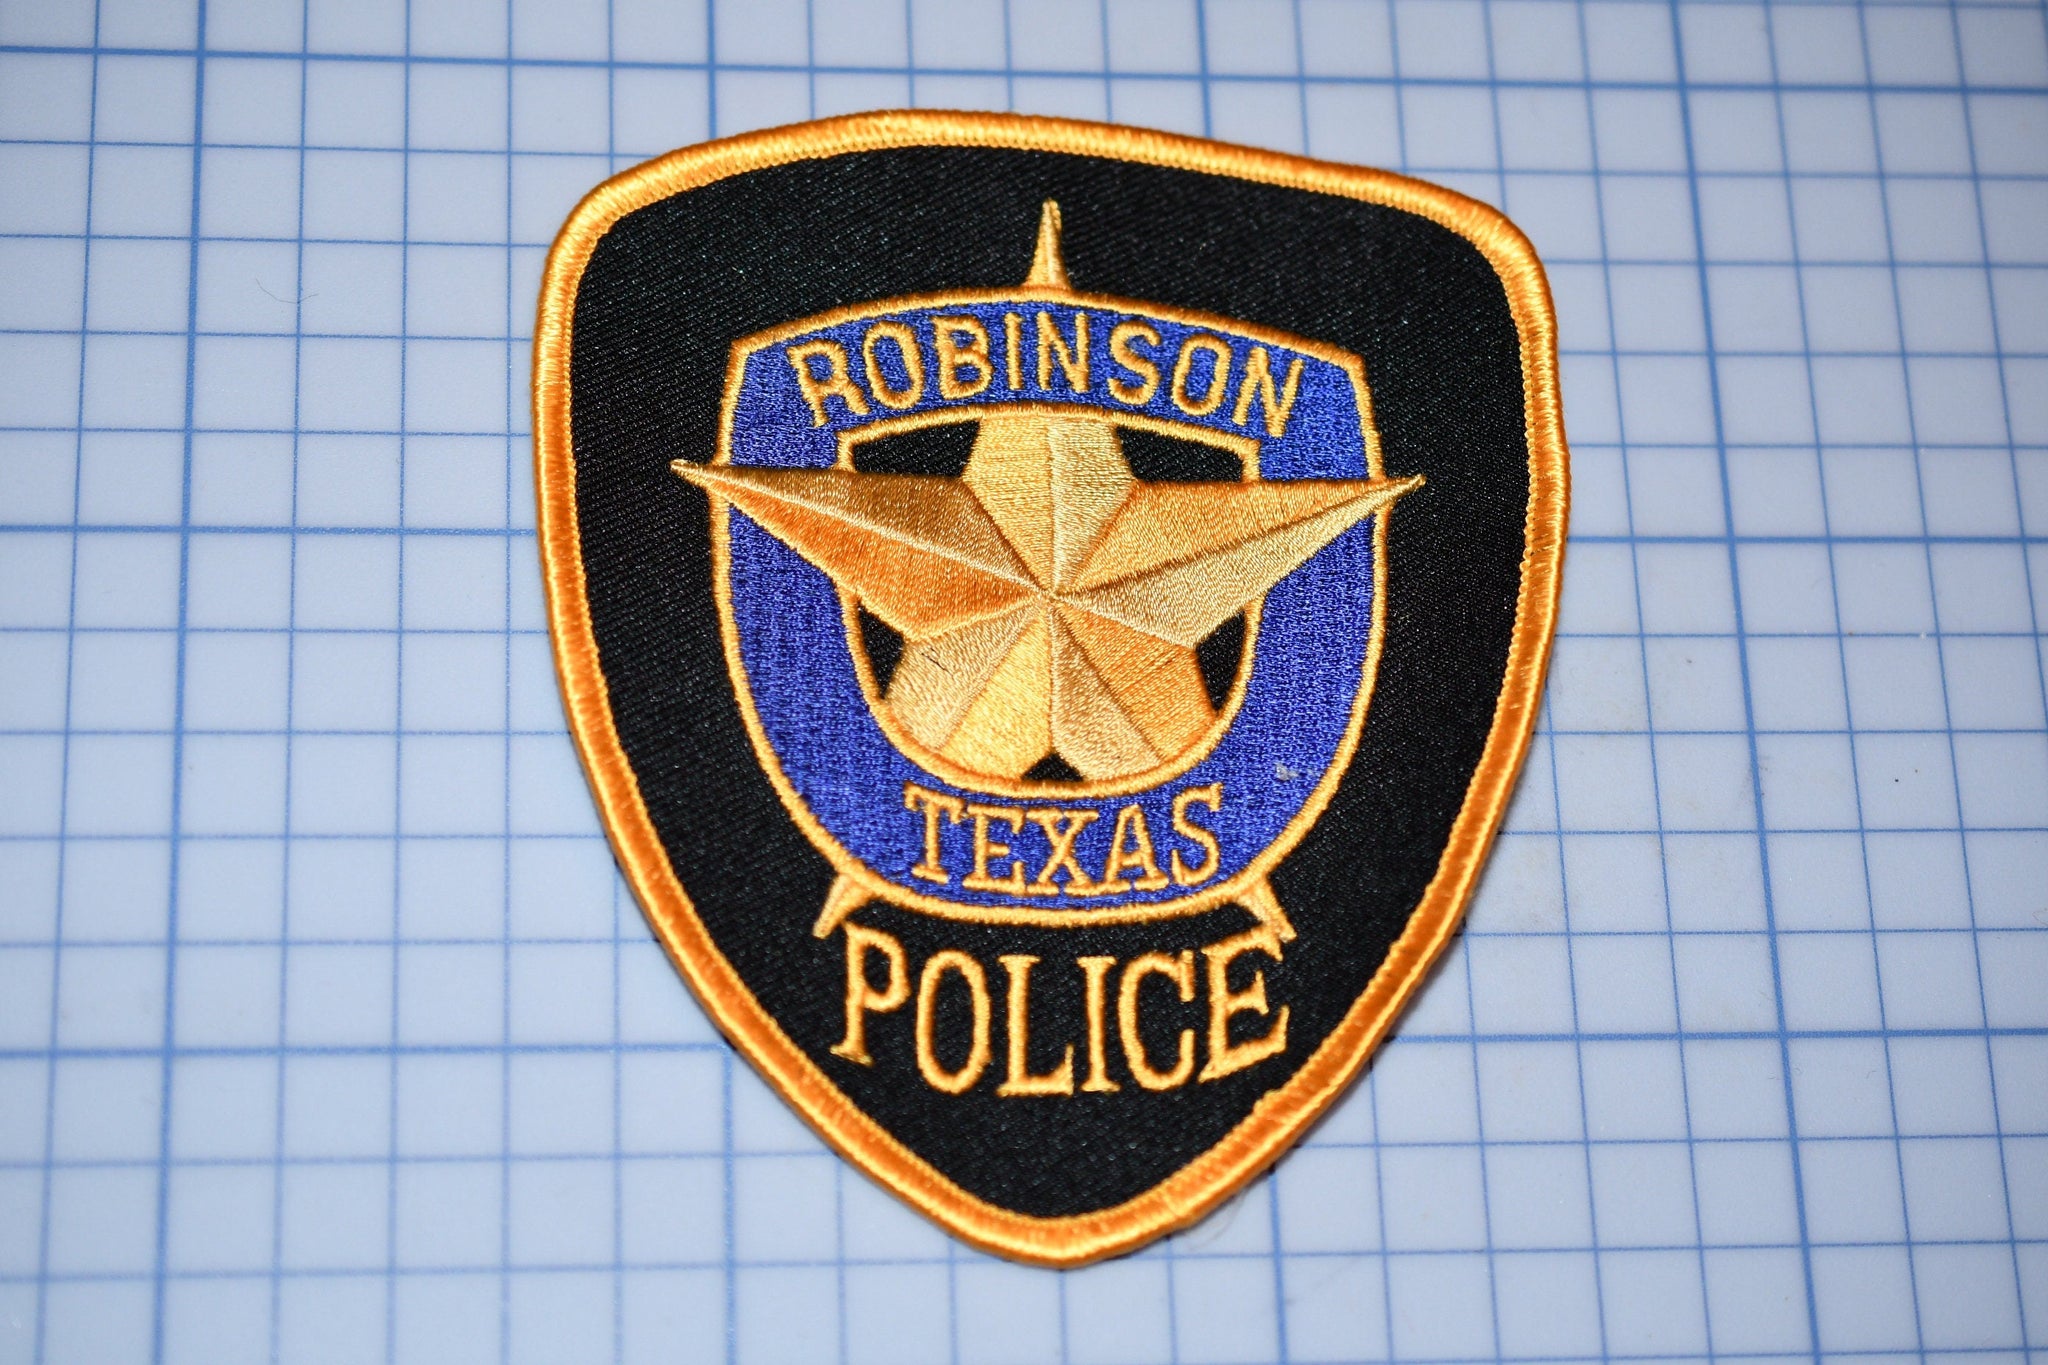 Robinson Texas Police Patch (S3-265)